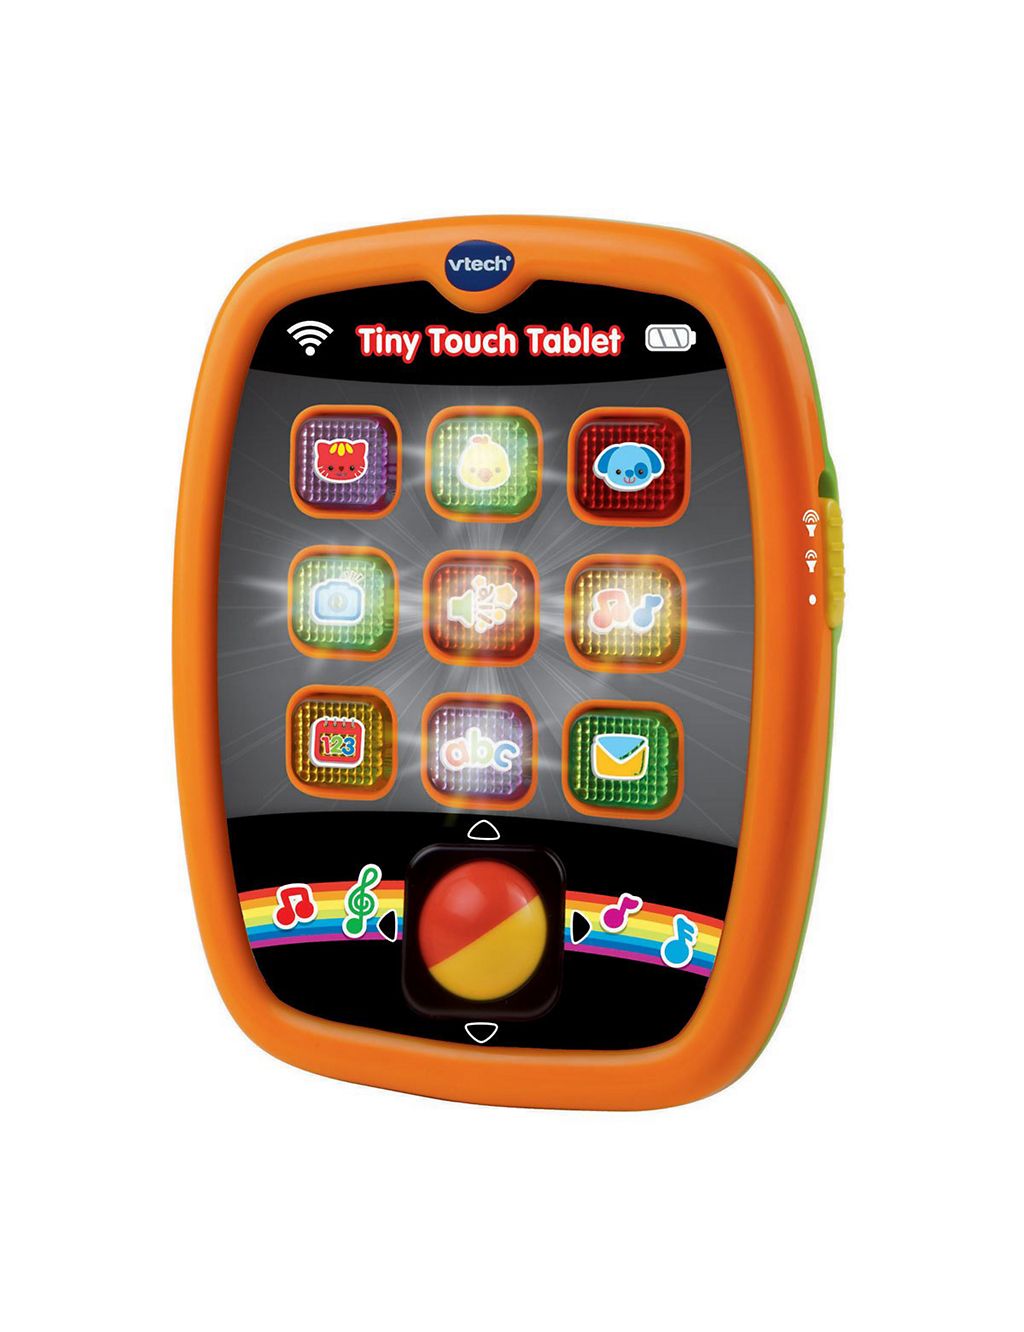 Baby Tiny Touch Tablet (6-36 Mths) 1 of 4